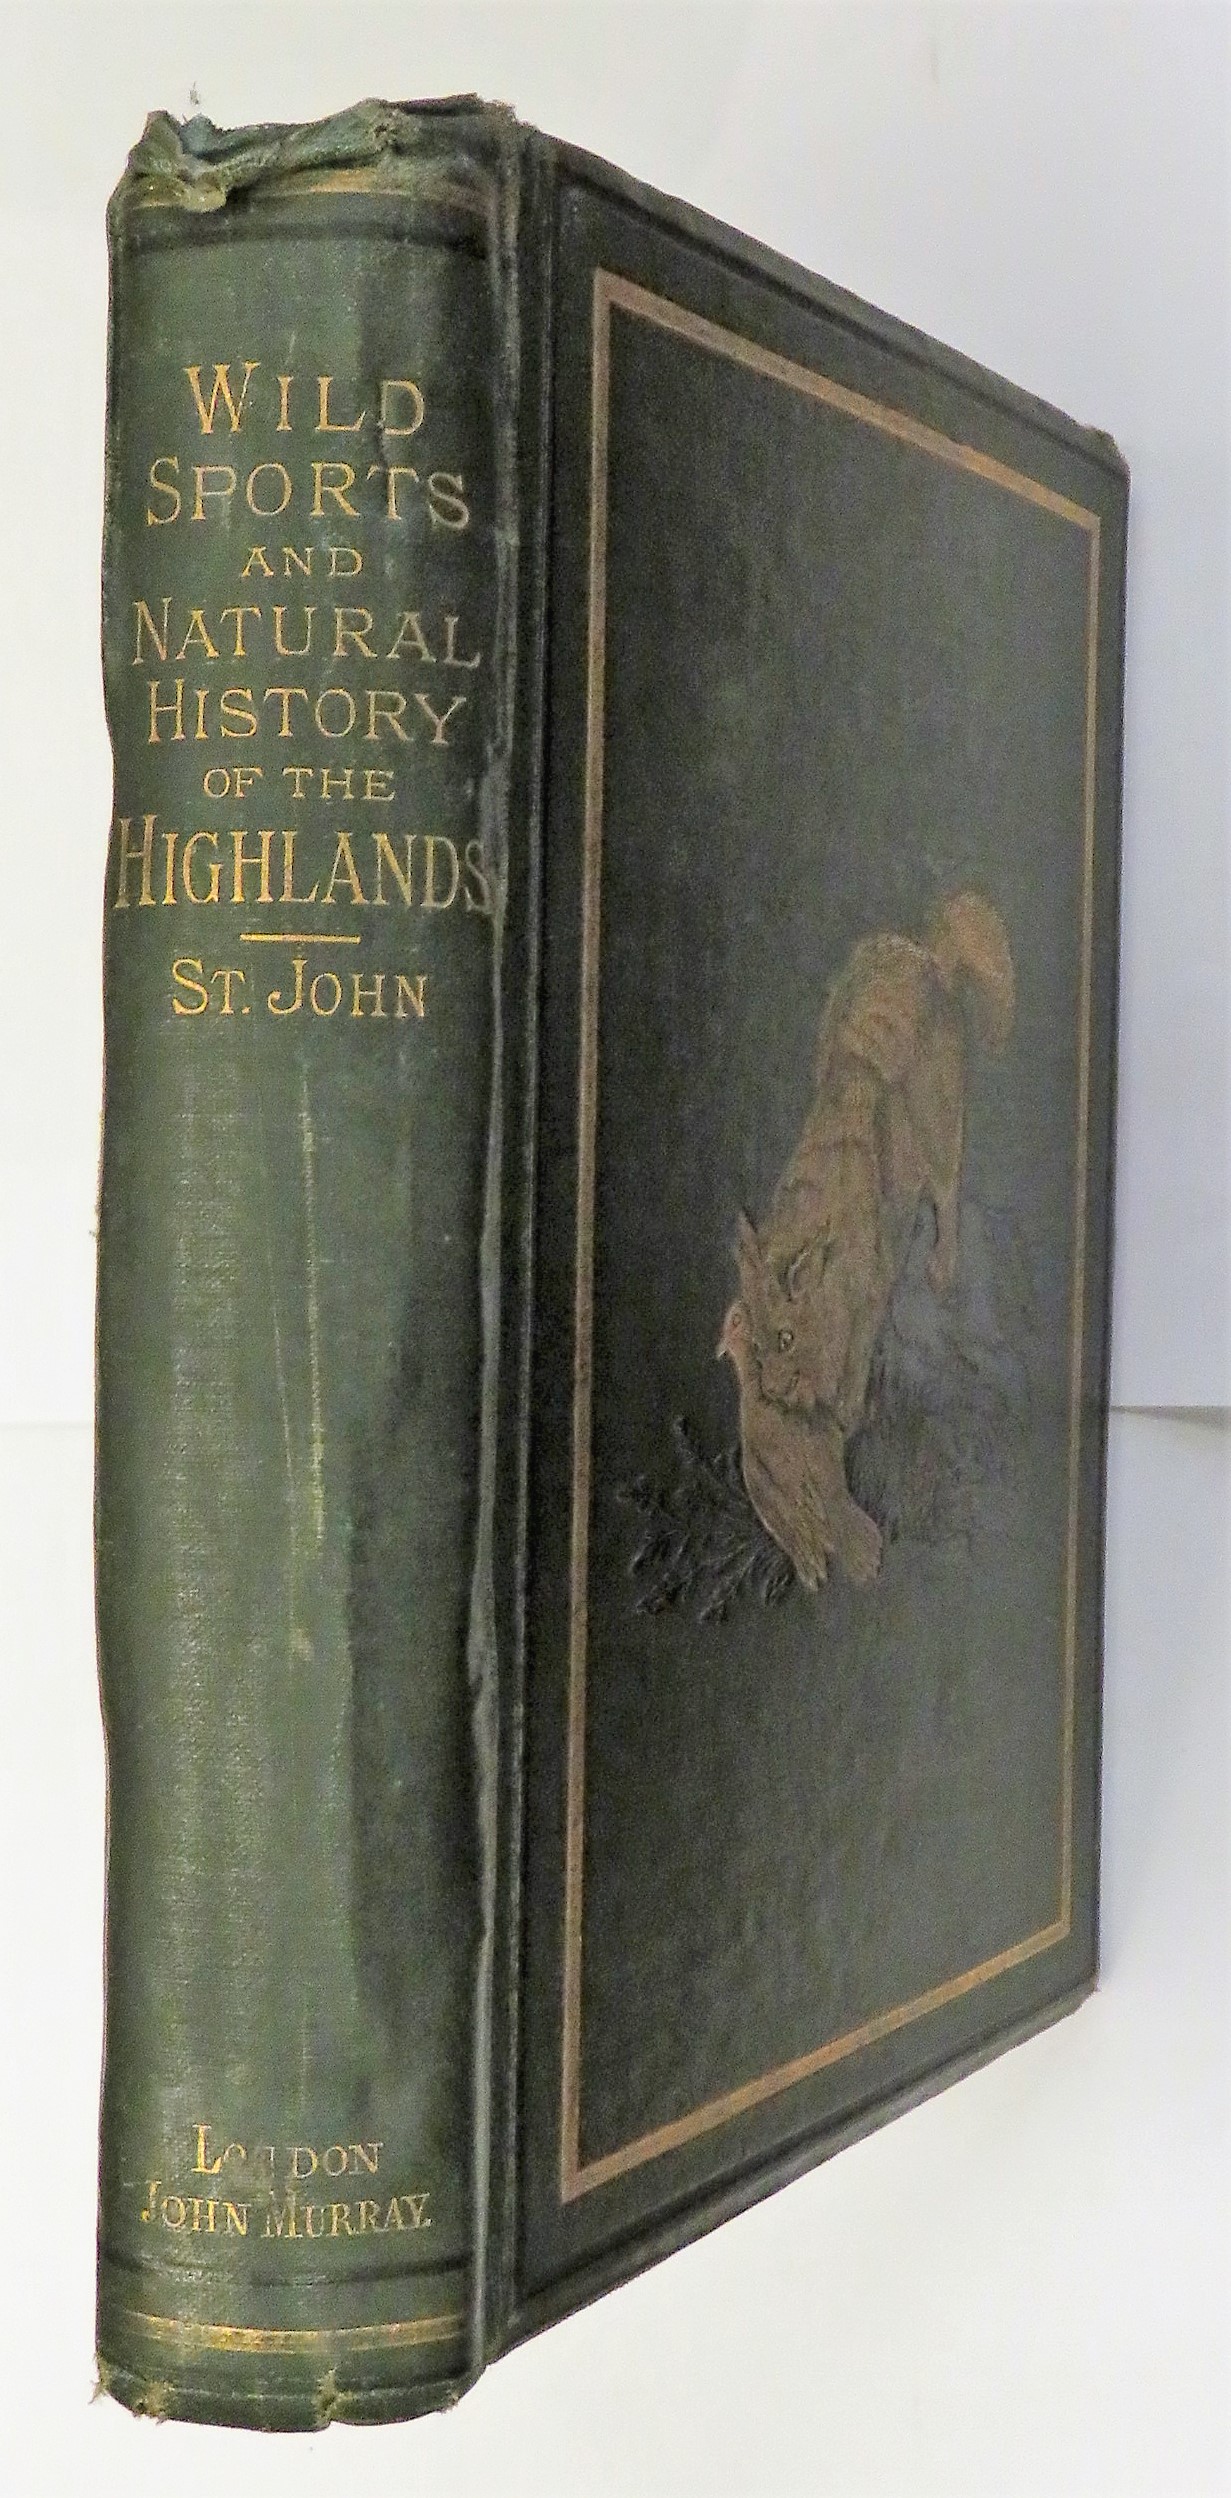 Sketches of the Wild Sports & Natural History of the Highlands